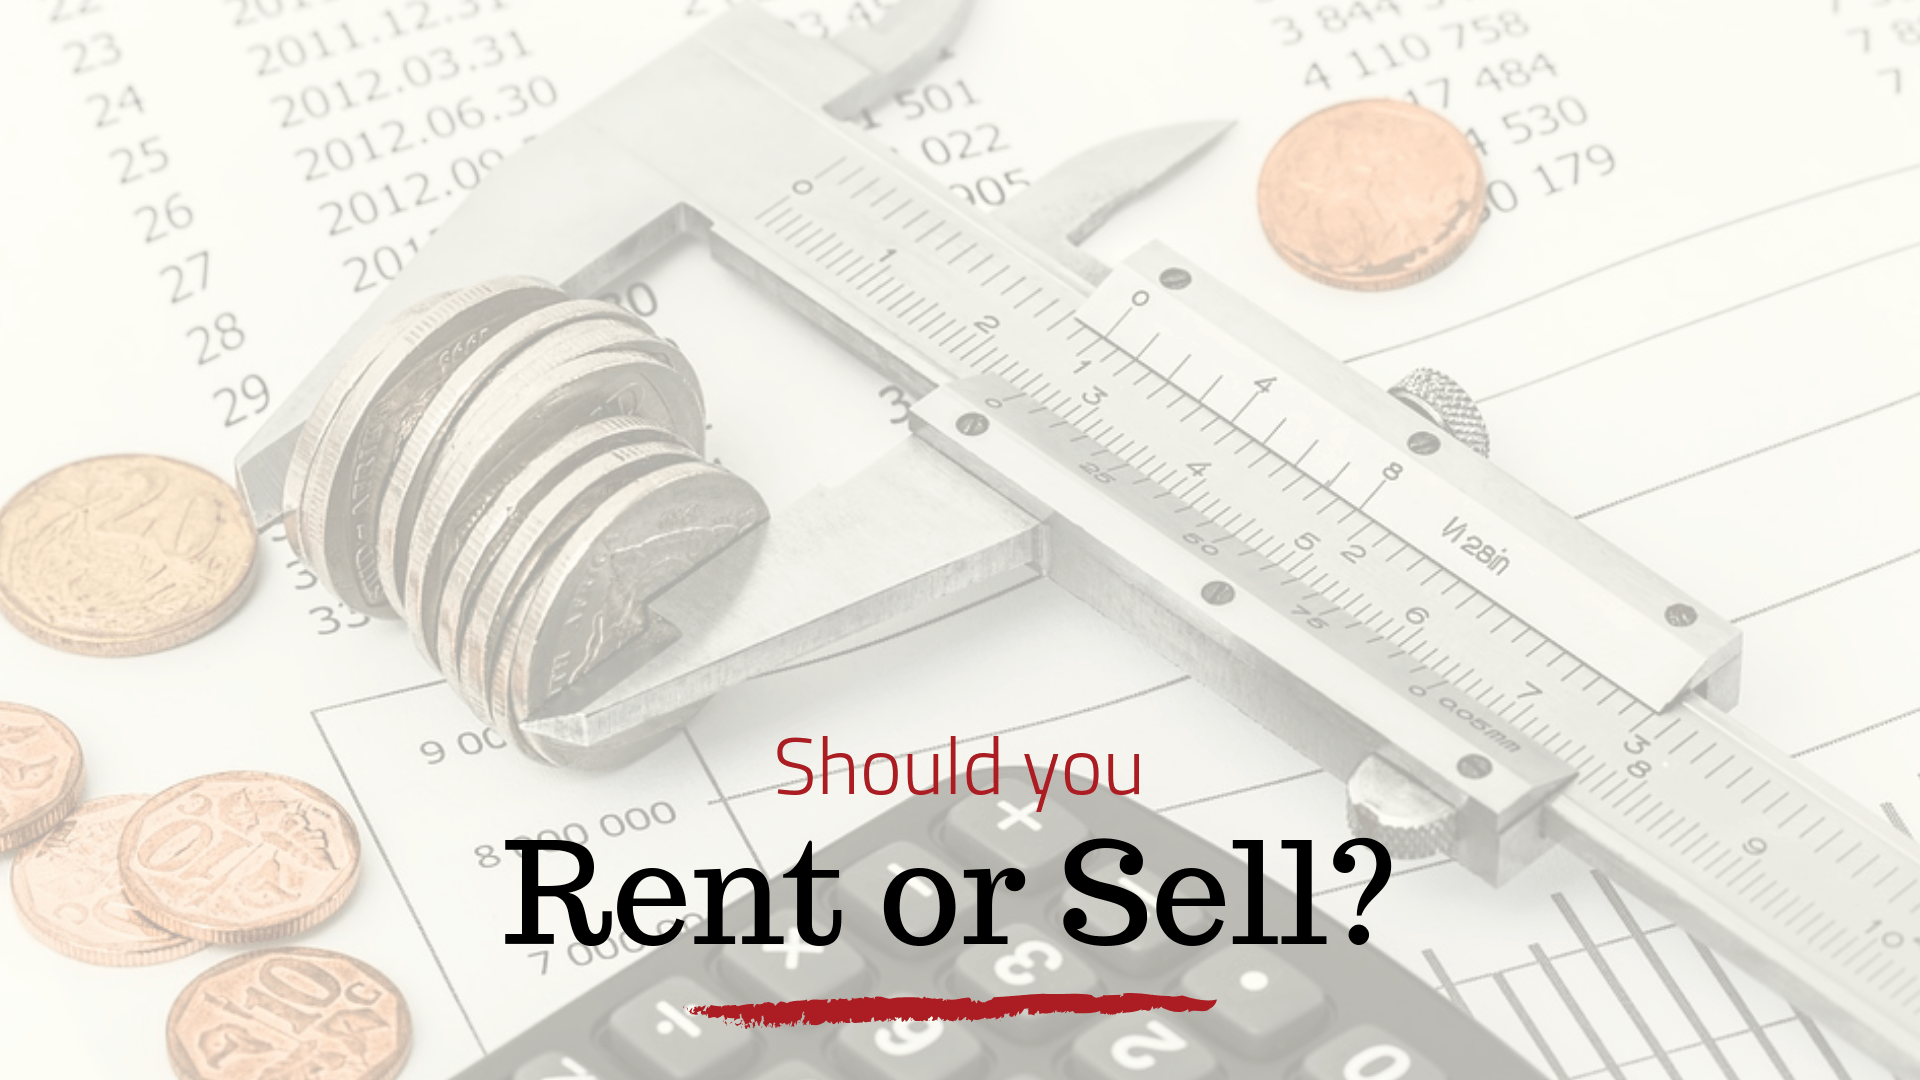 Should you Rent or Sell Your Investment Property? -  Los Angeles Out of State Landlord Advice